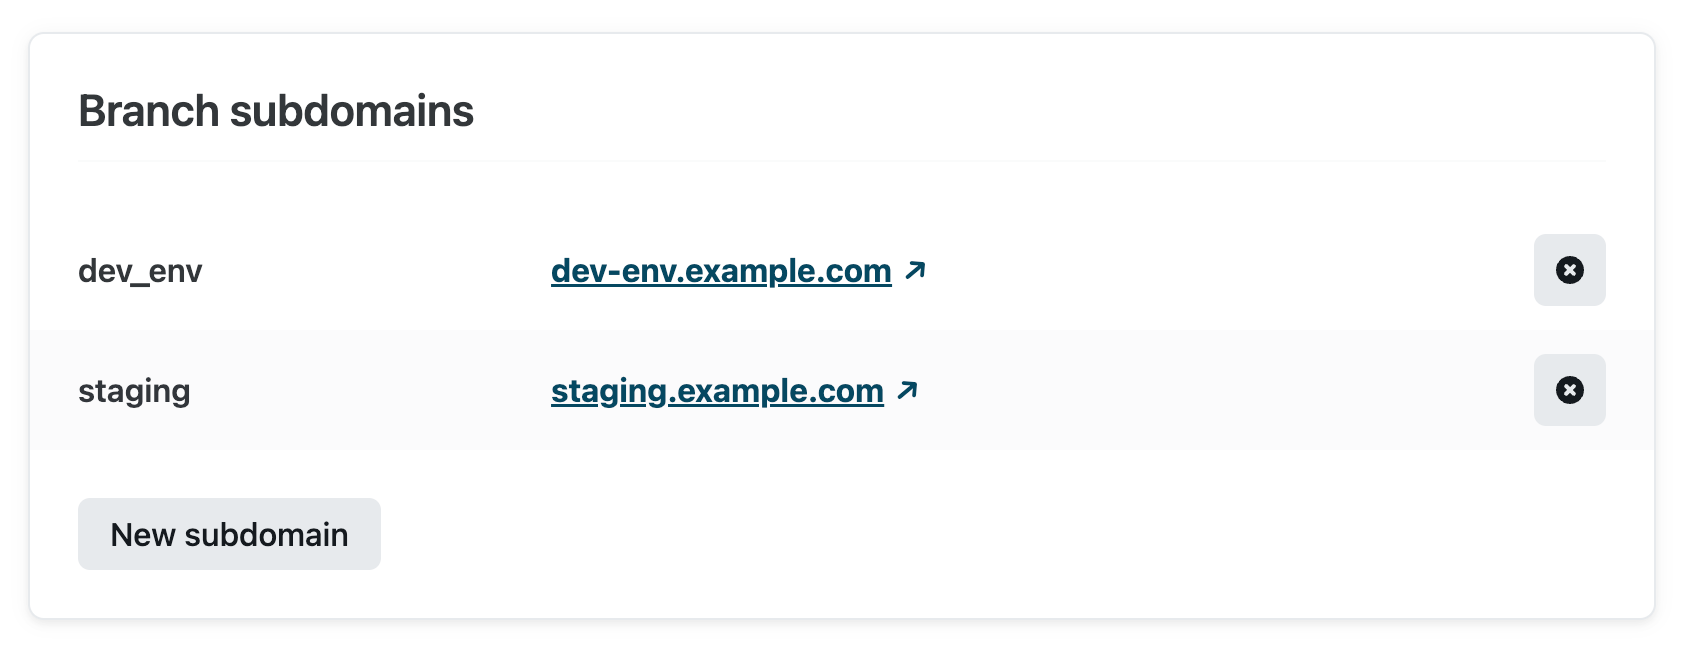 Examples of branch subdomains